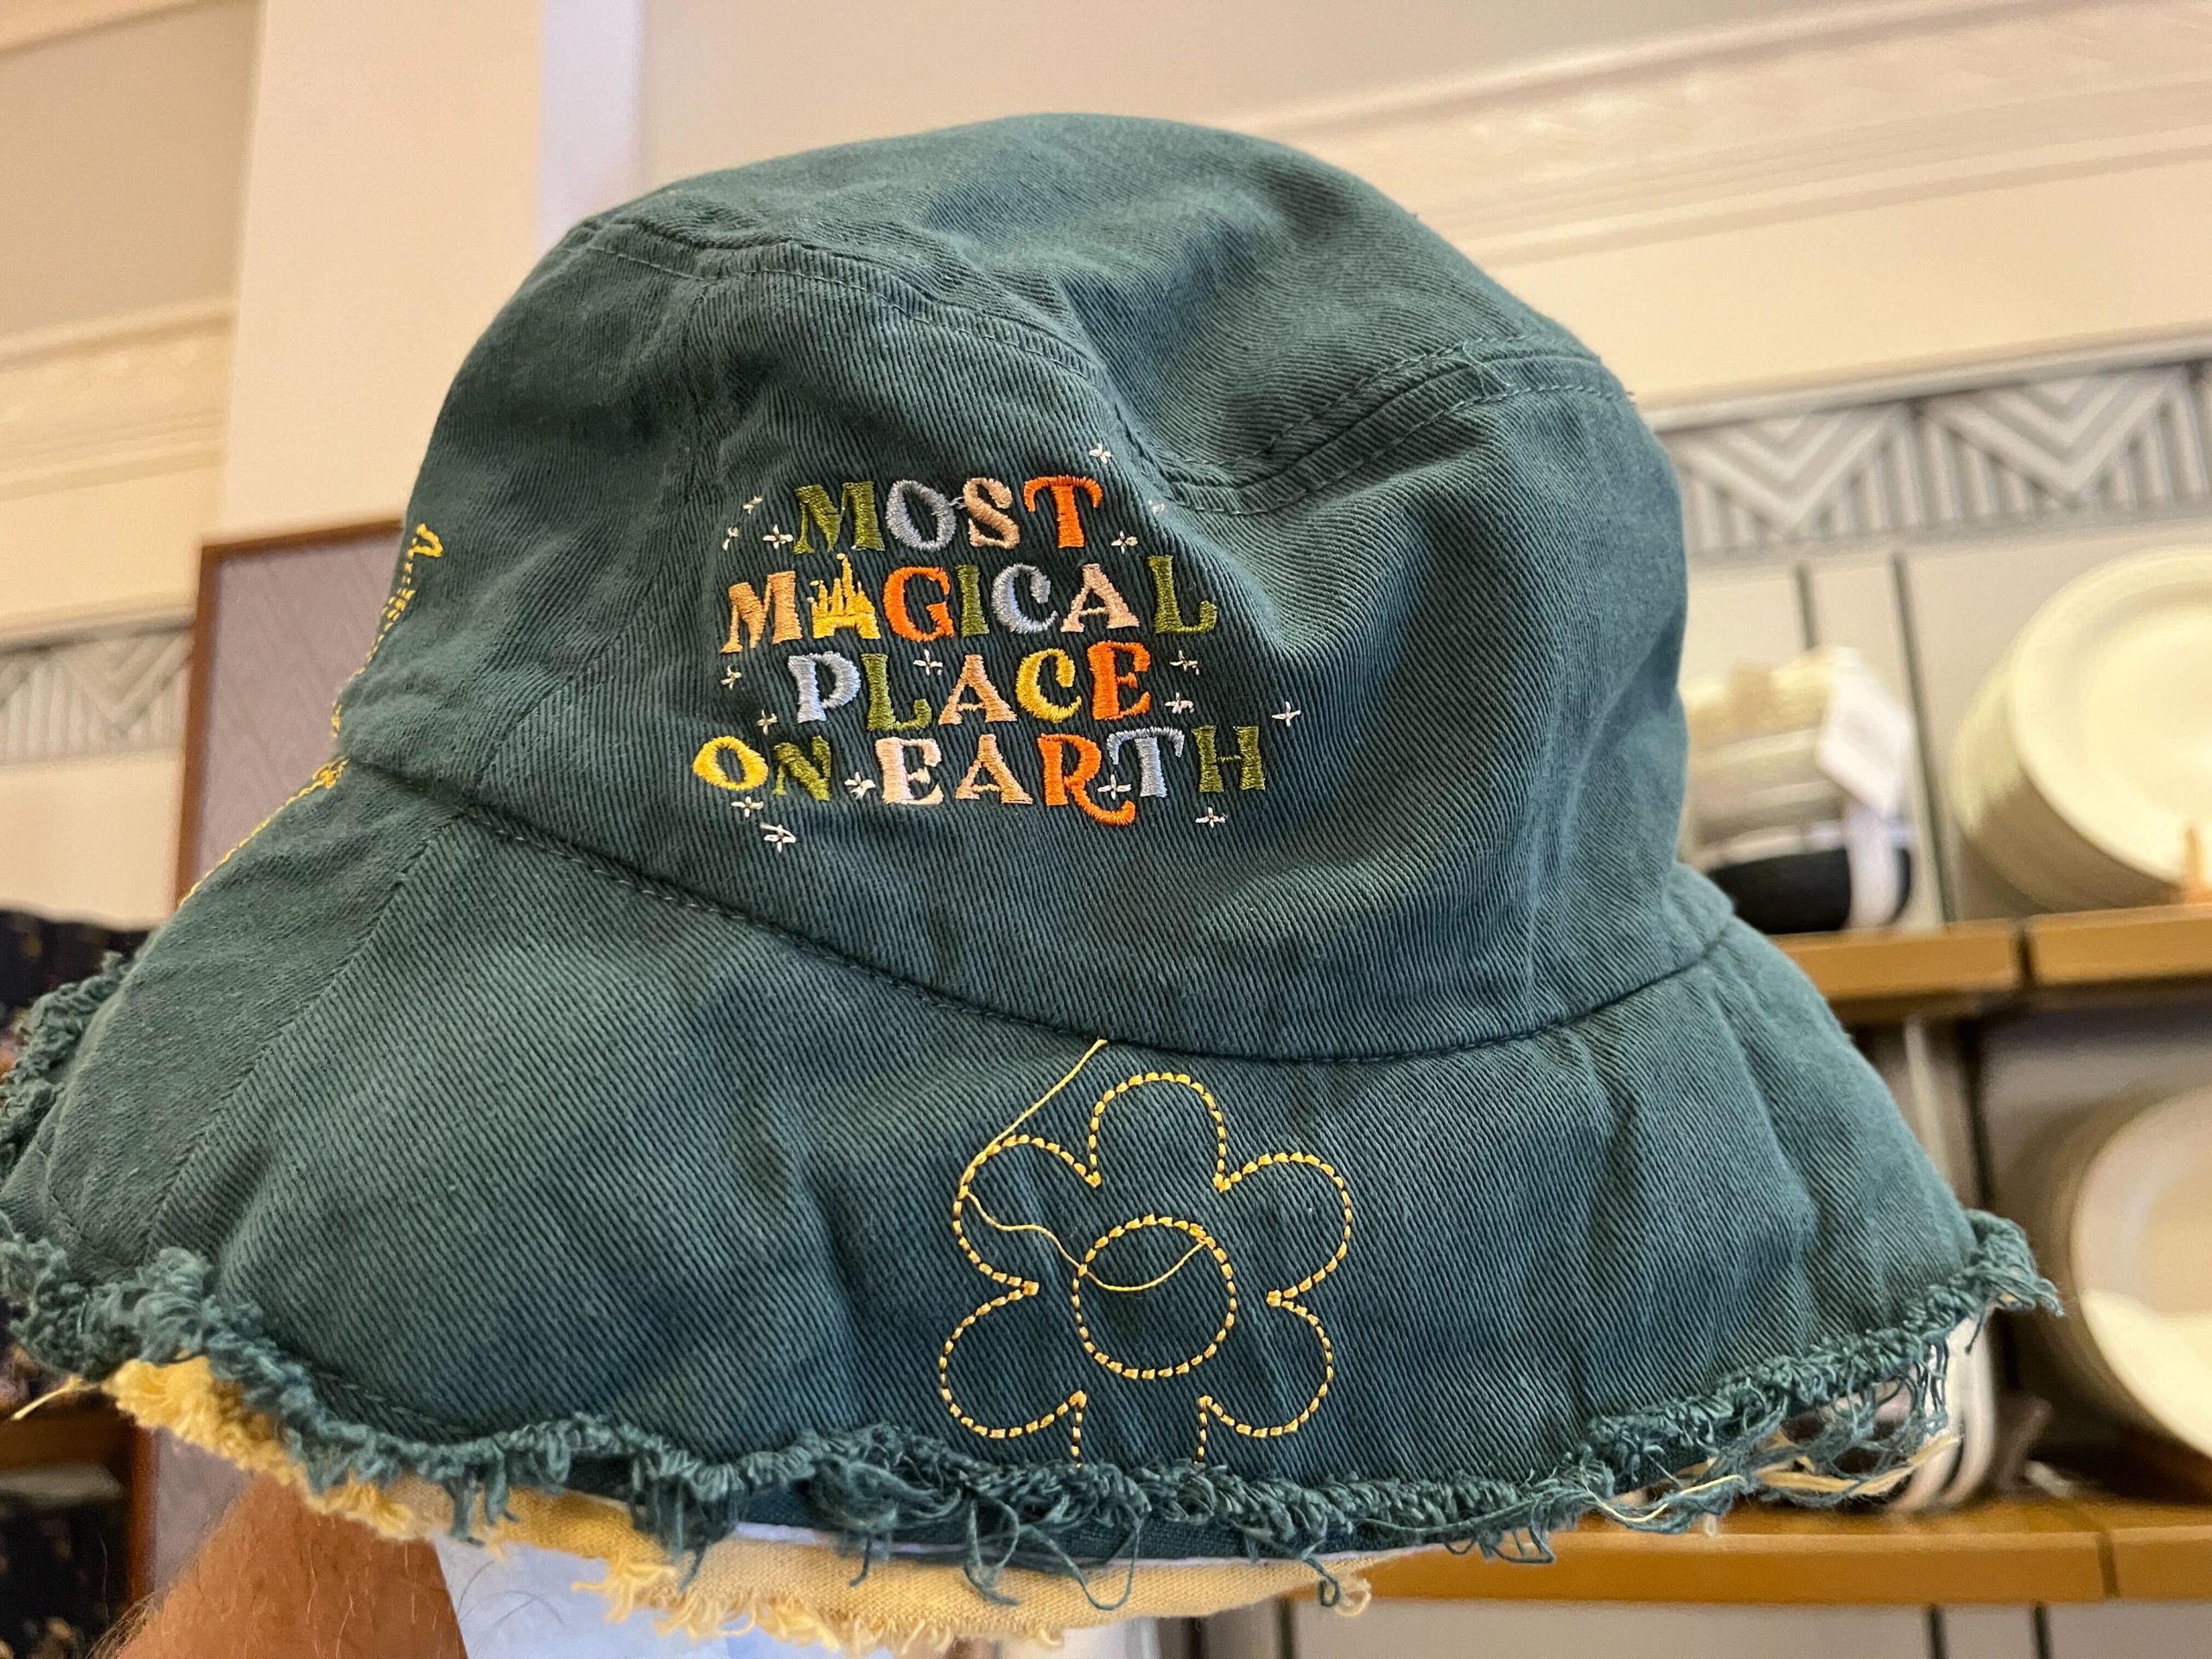 We Love These Trendy New Disney Hats from Hollywood Studios